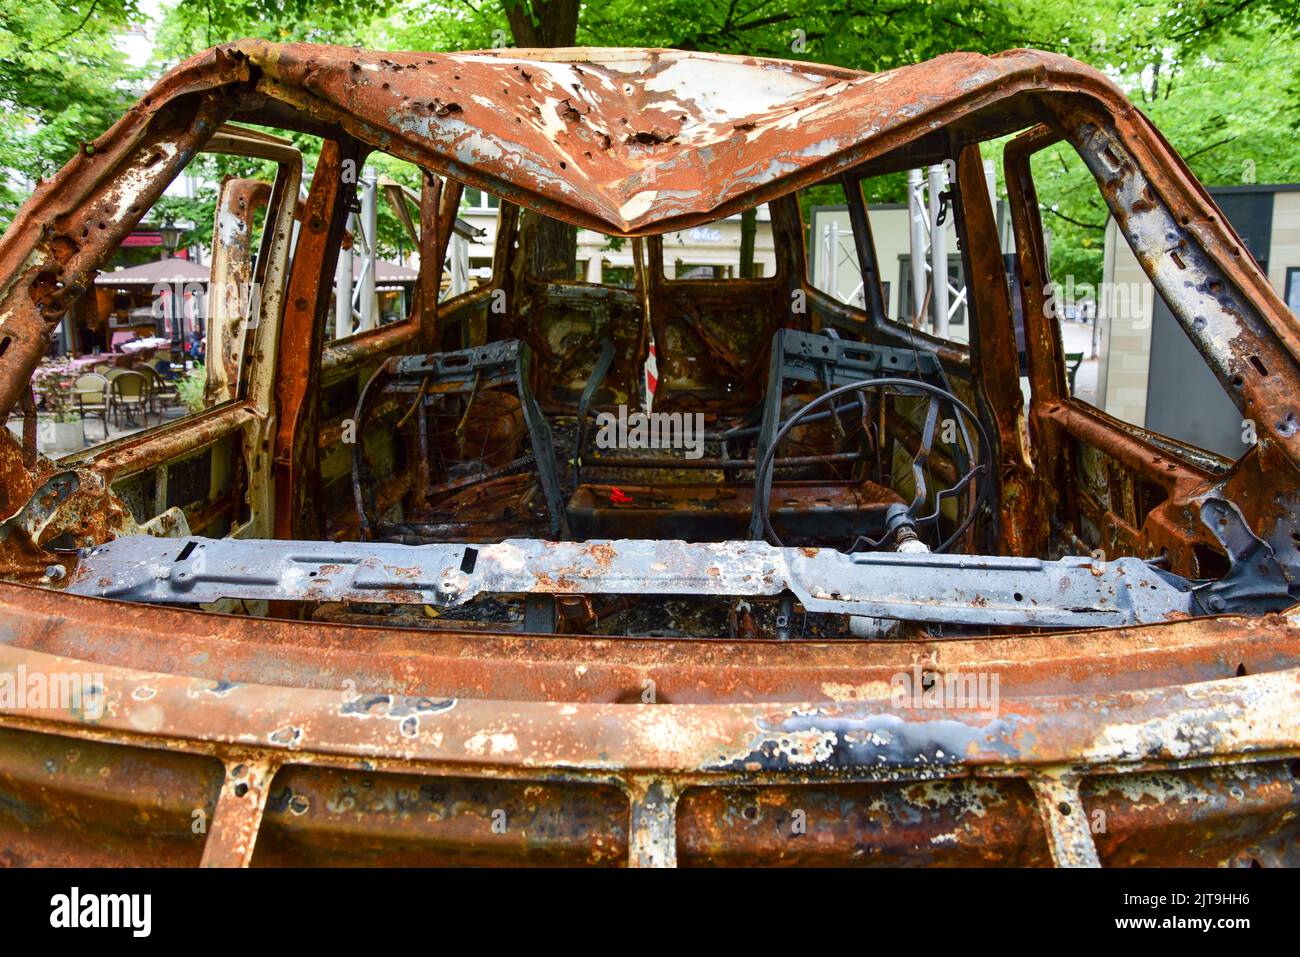 Vehicle in which three Ukrainian women and a 14-year-girl were killed in Bucha, Ukraine, on display in Berlin for the 'Testament of Bucha' project Stock Photo